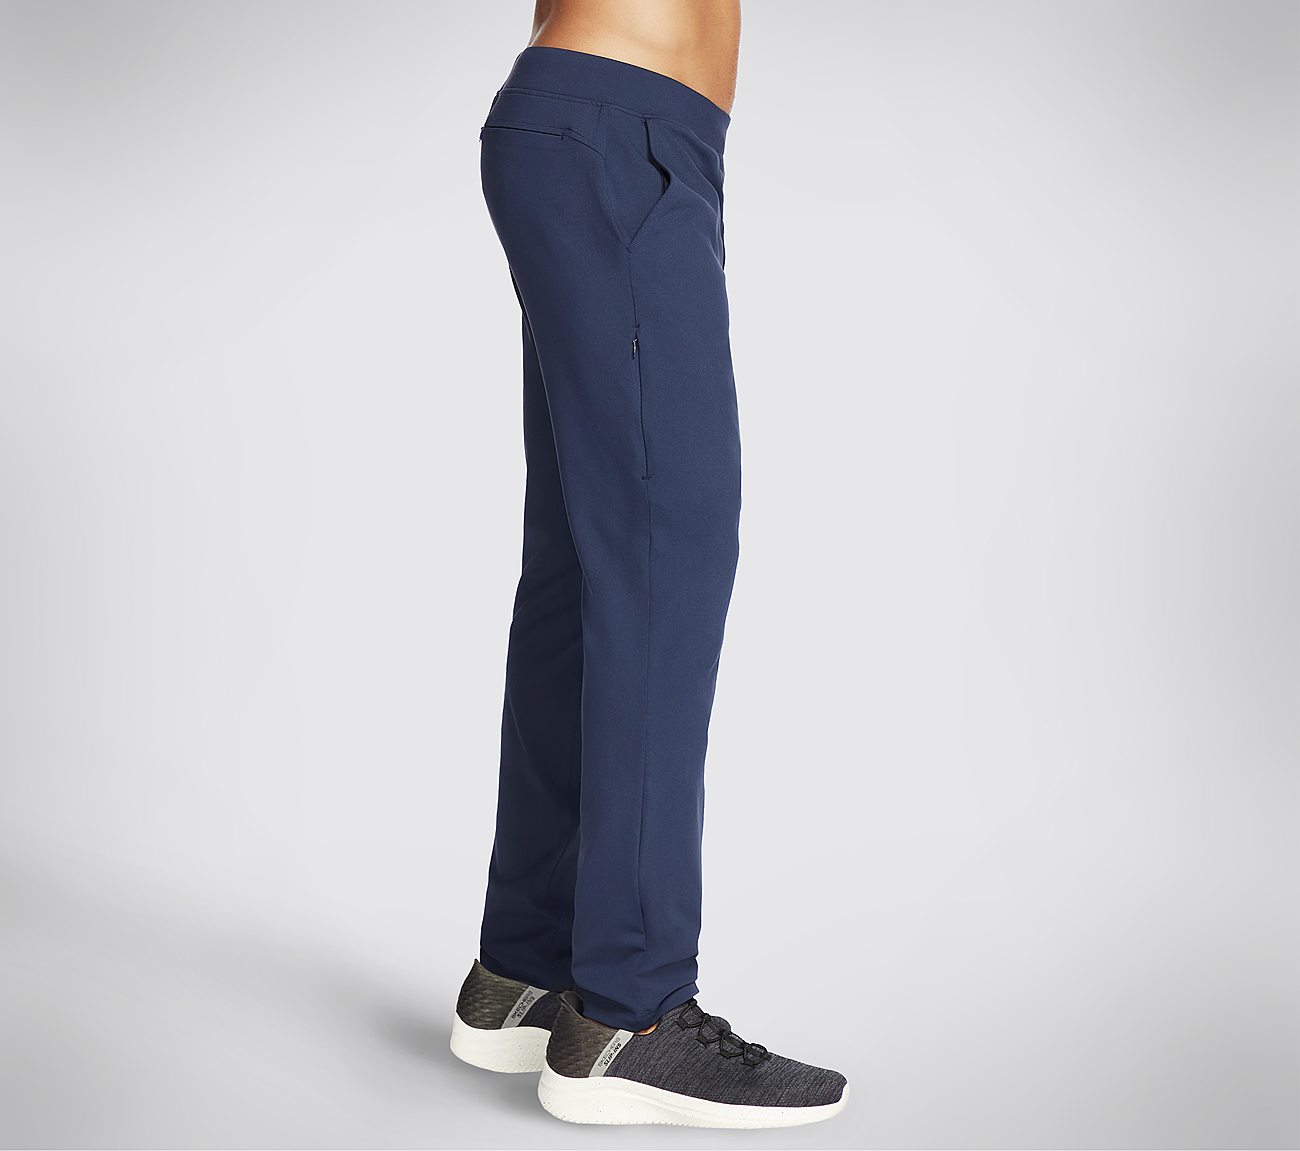 THE GOWALK PANT CONTROLLER, NNNAVY Apparels Bottom View